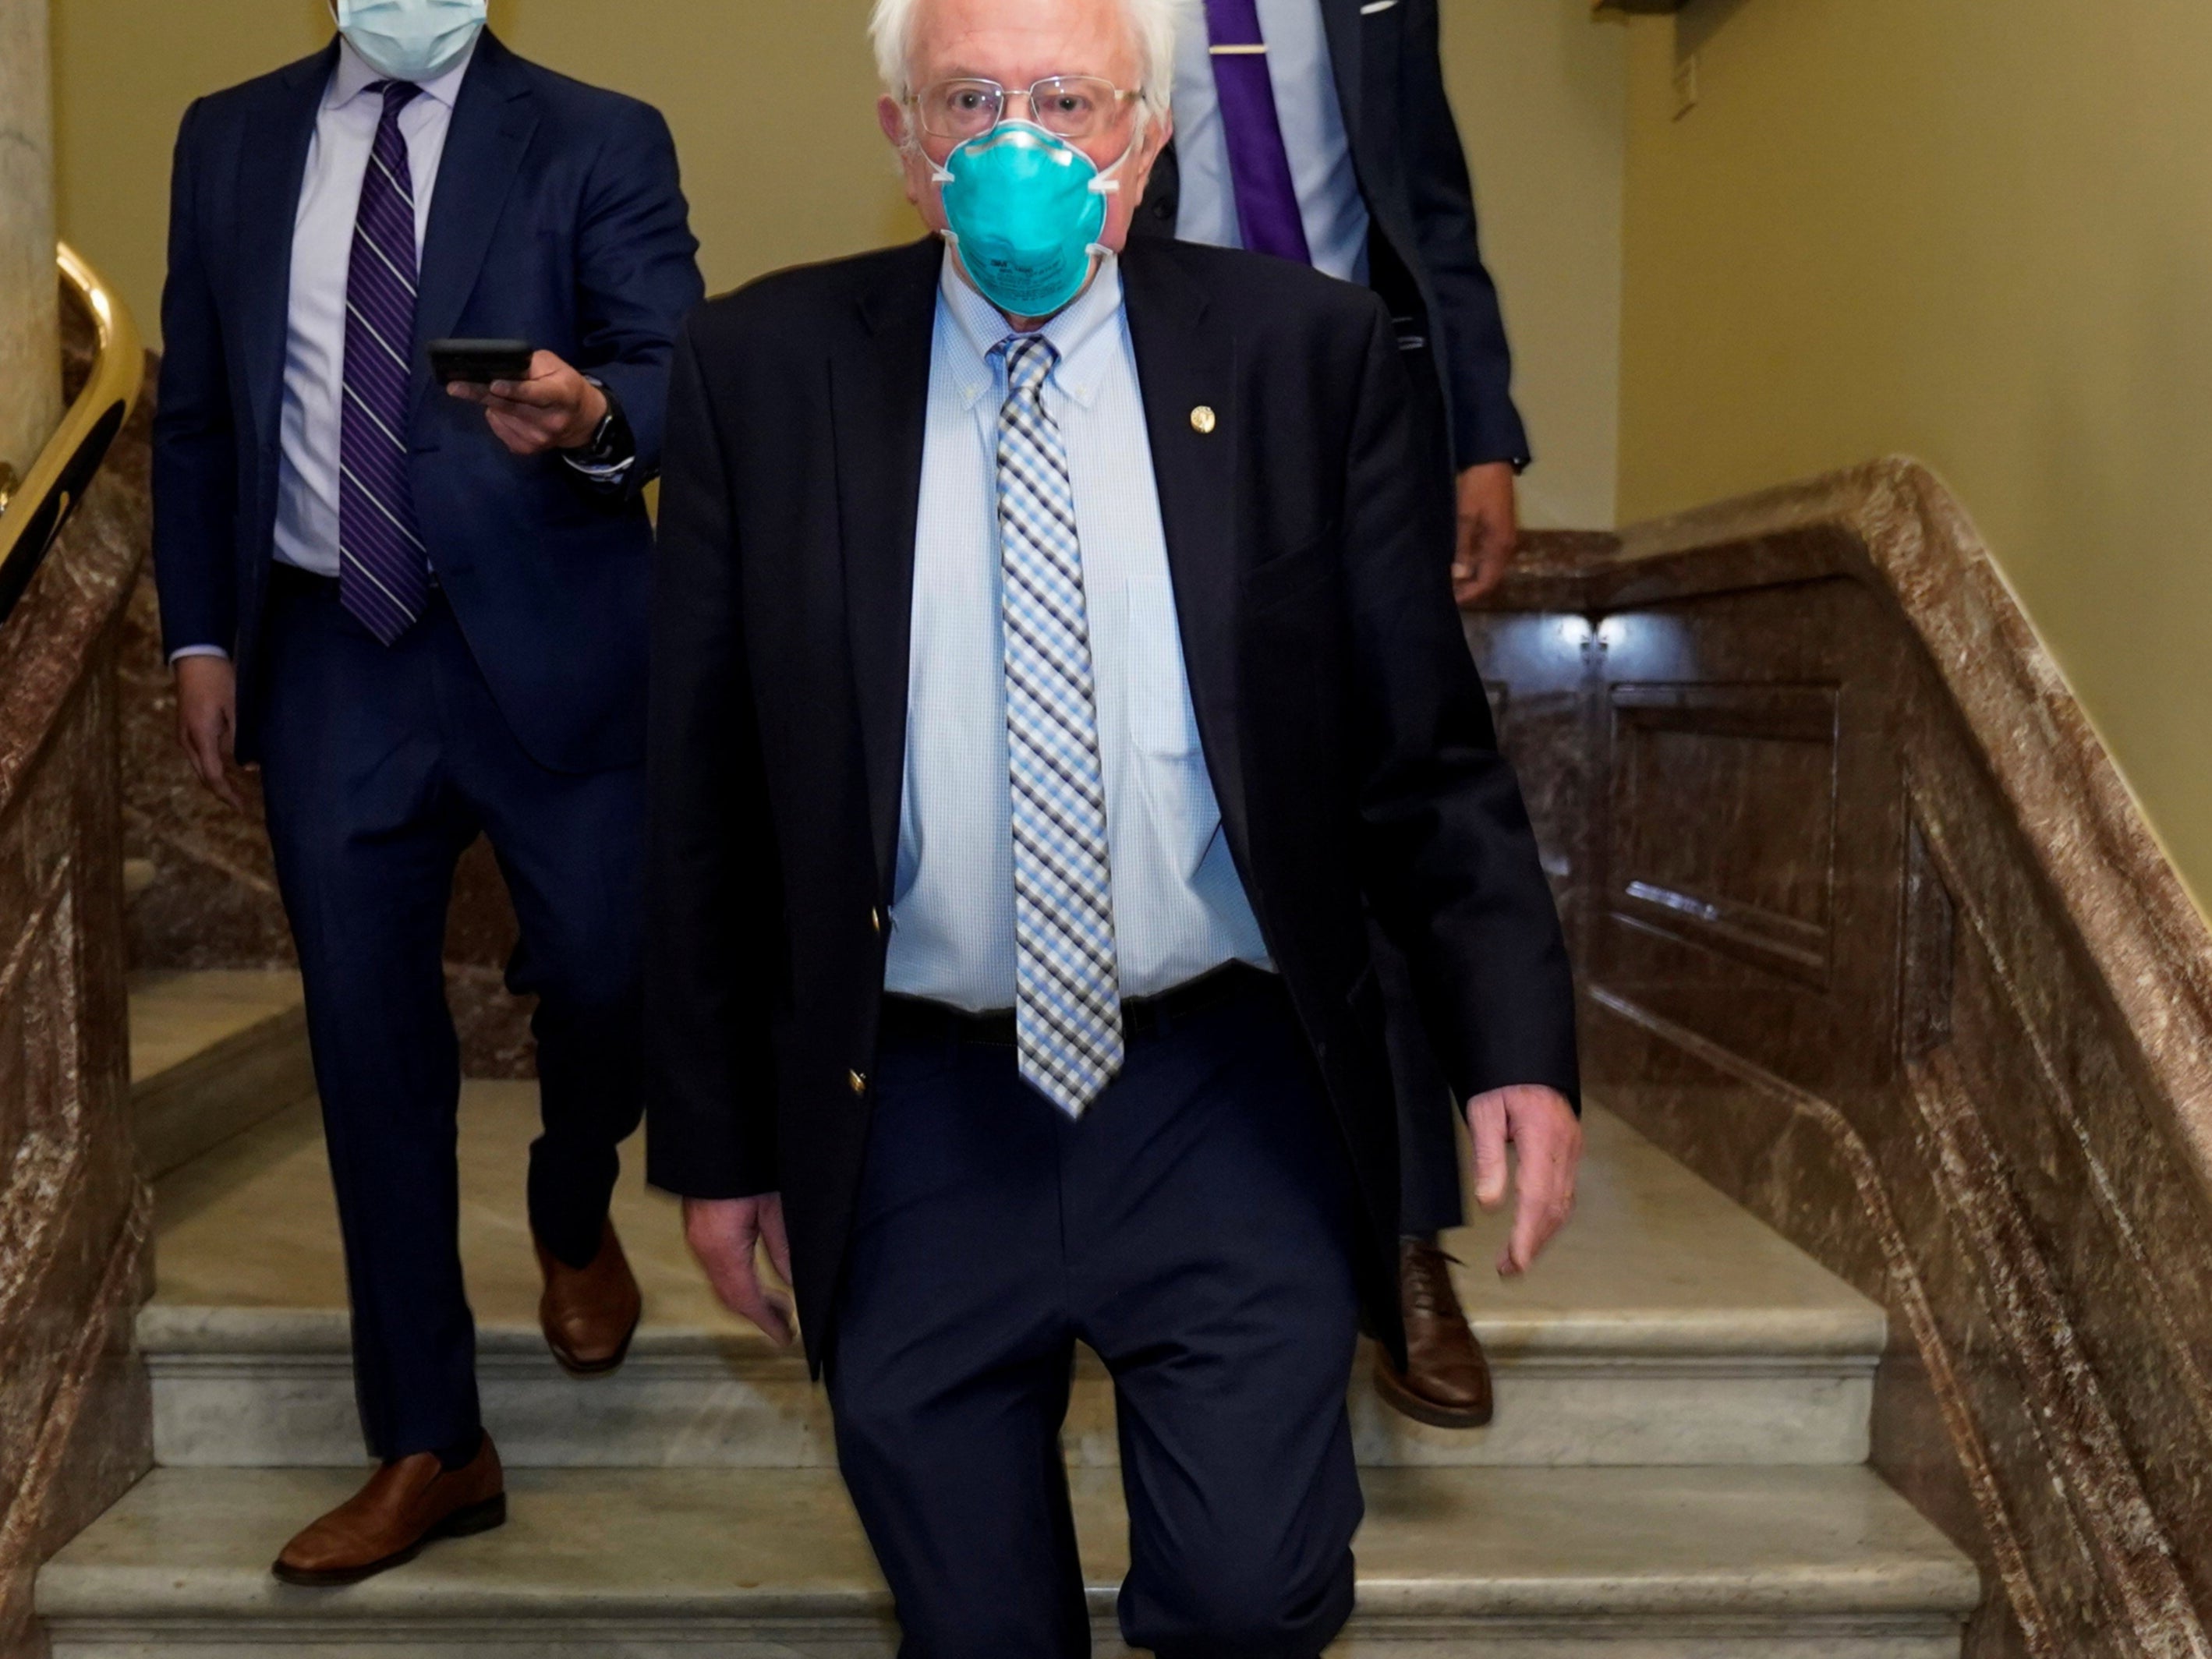 Bernie Sanders after voting in the Capitol